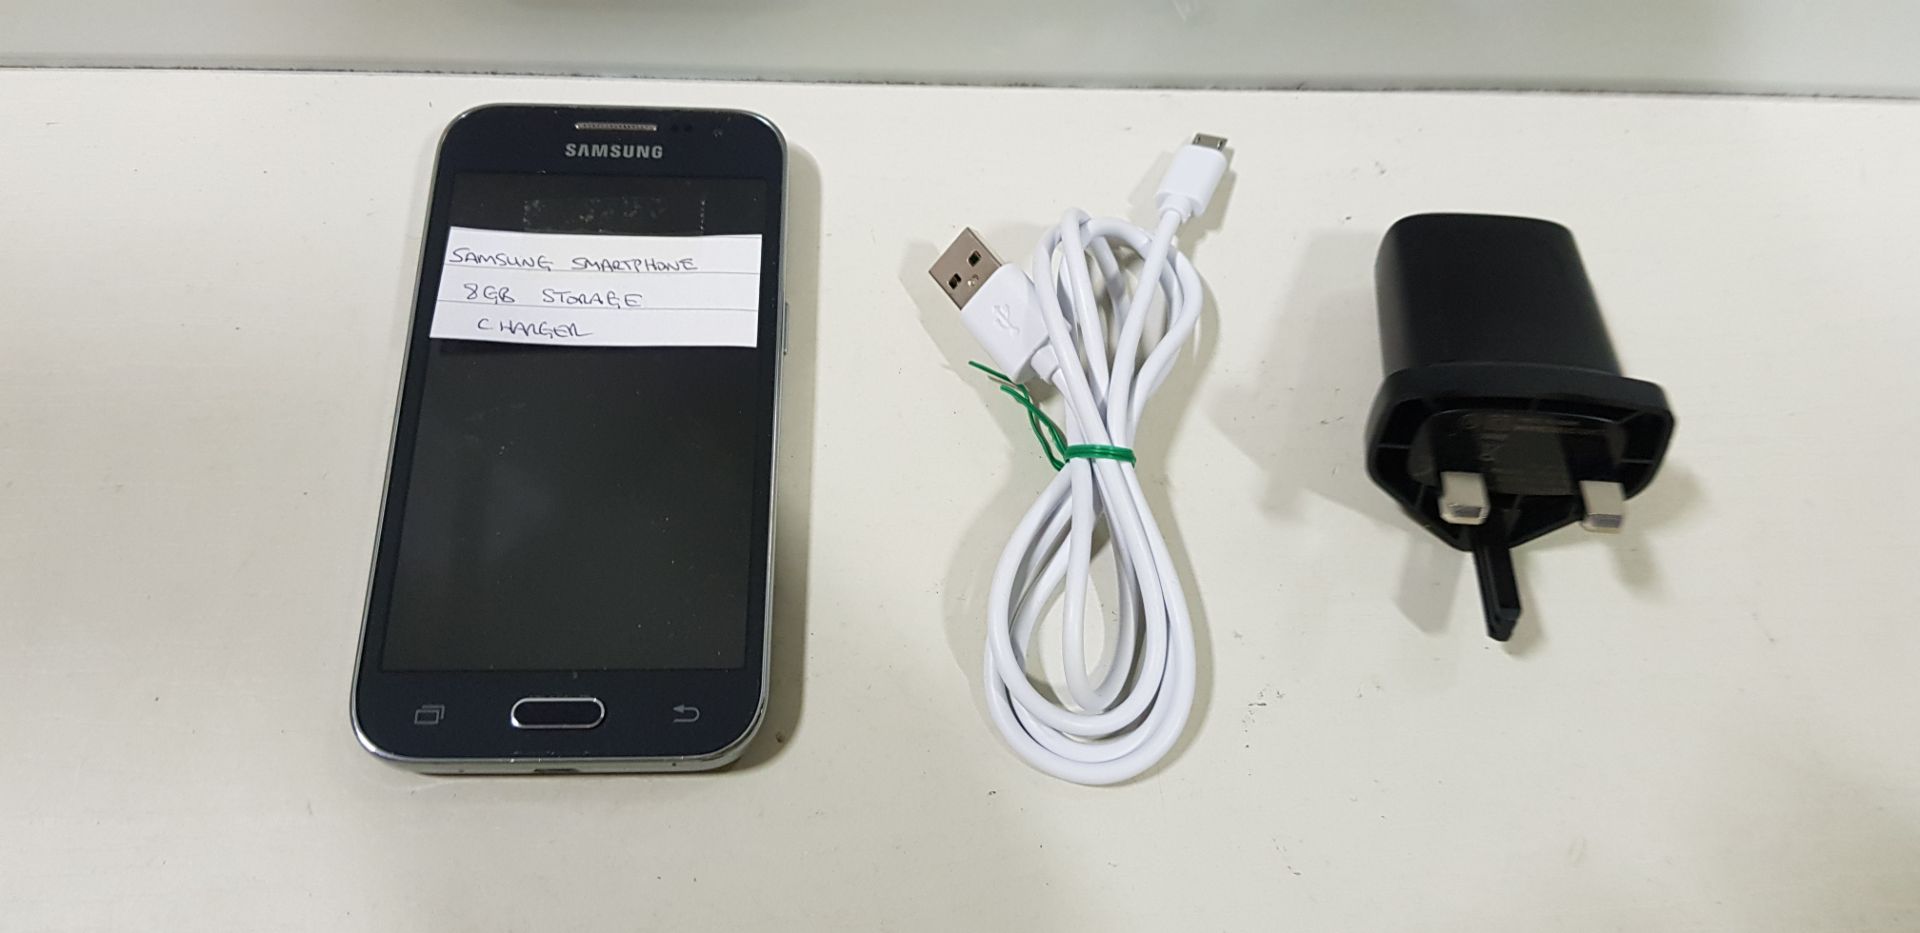 SAMSUNG SMARTPHONE 8GB STORAGE - WITH CHARGER